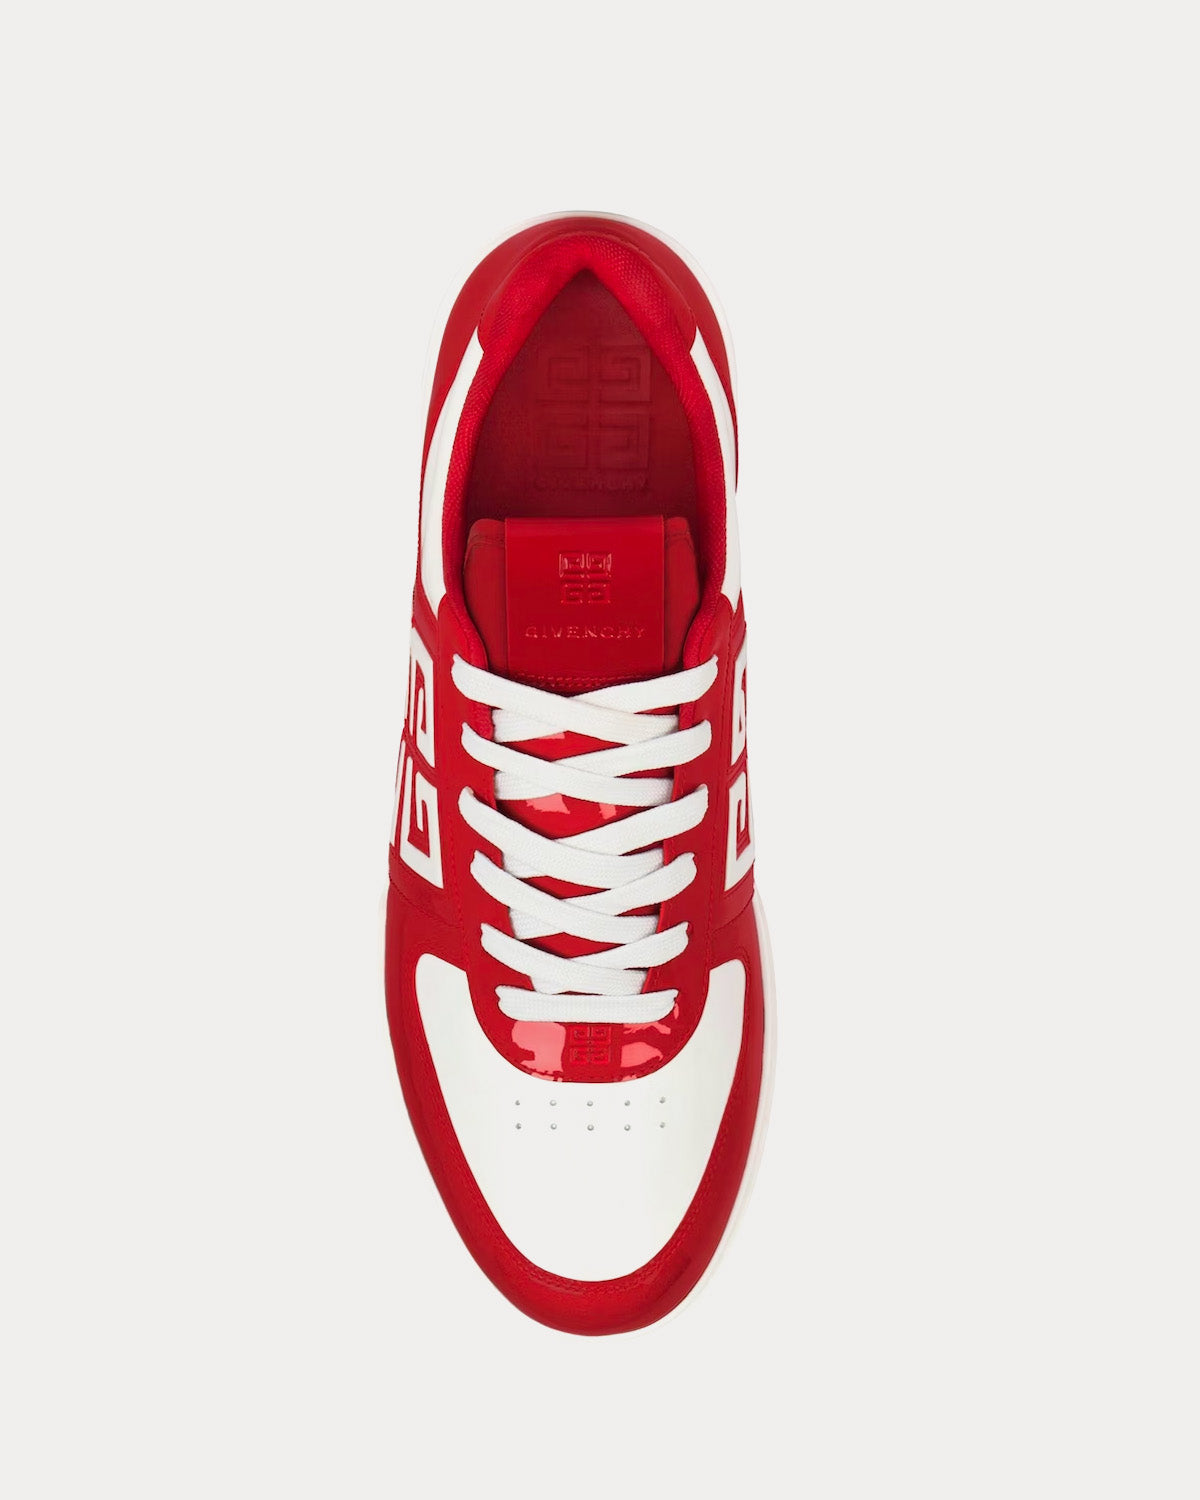 Givenchy - G4 Patent Leather Red / White Low Top Sneakers